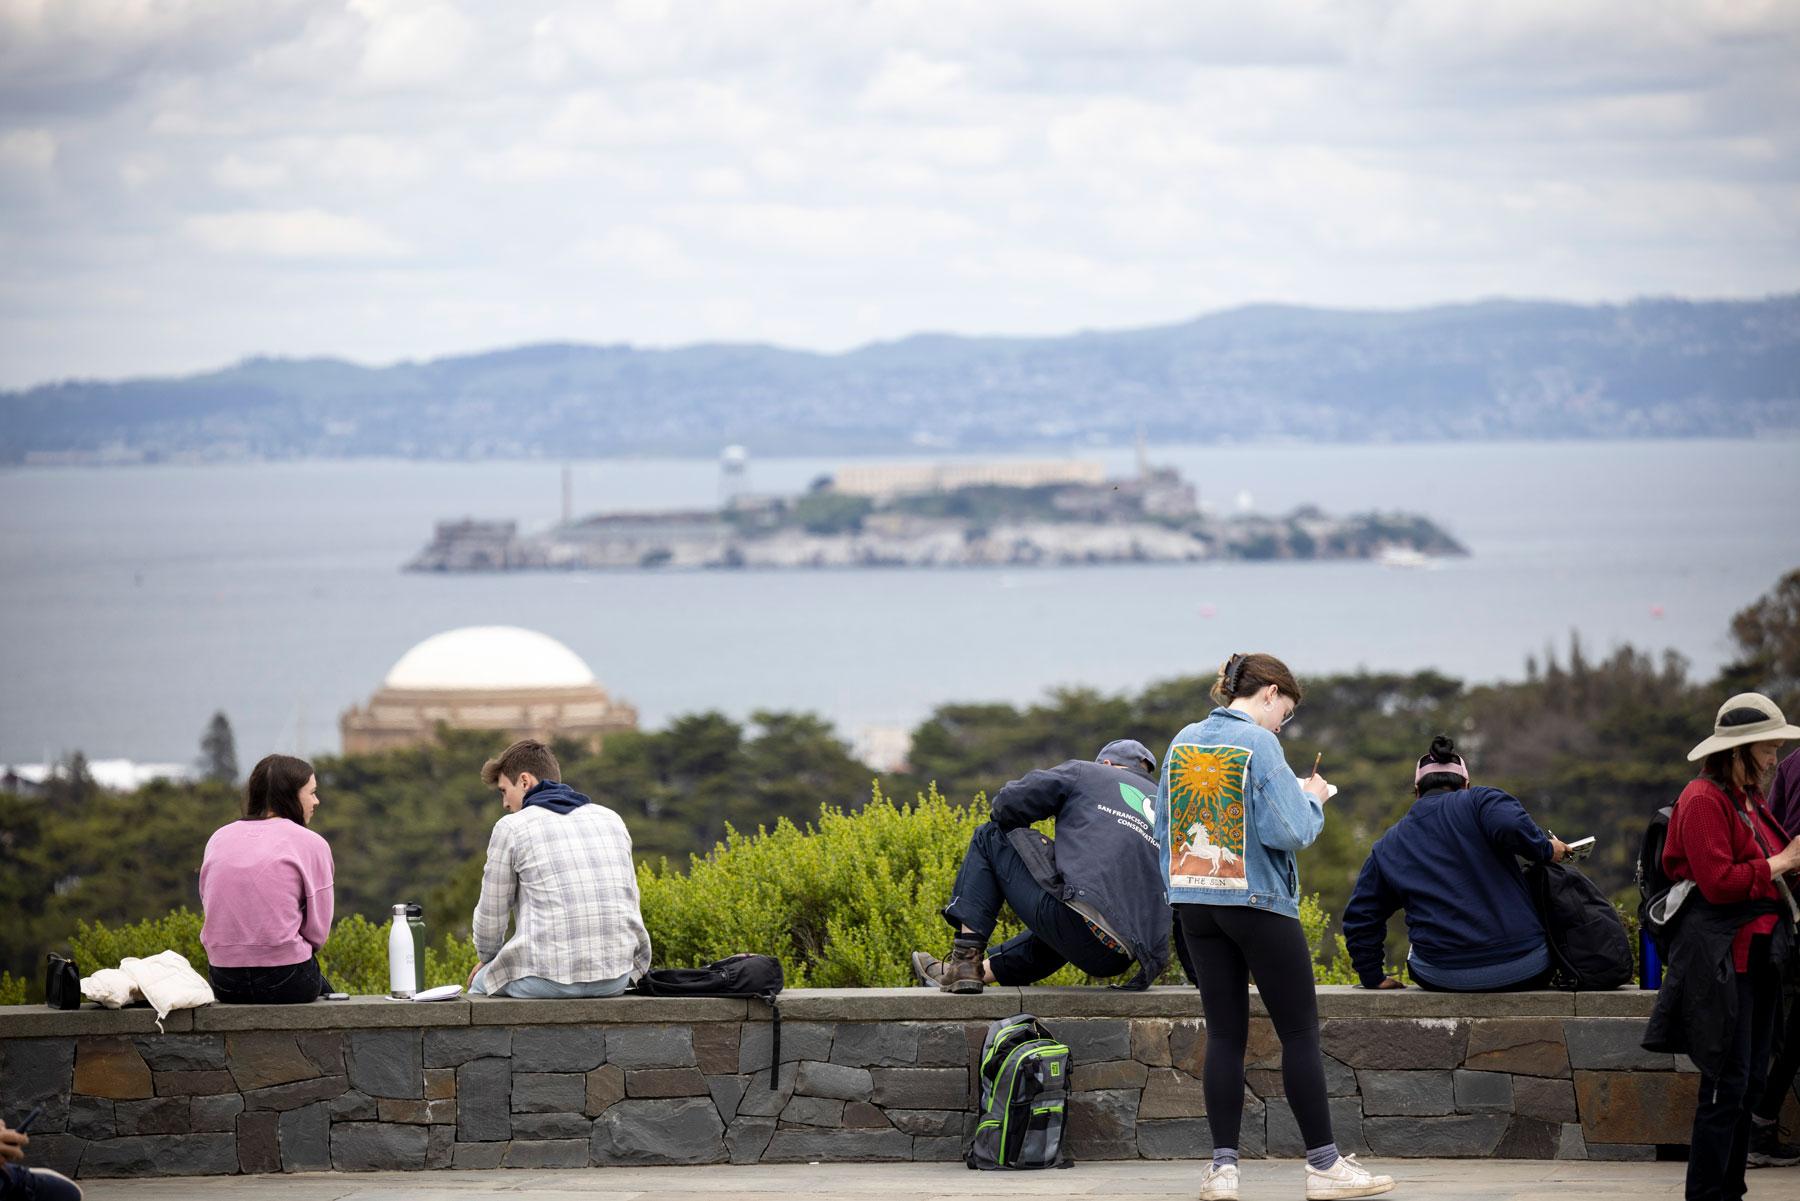 Visitors enjoying the view from Inspiration Point Overlook in the Presidio. Photo by Paul Myers.